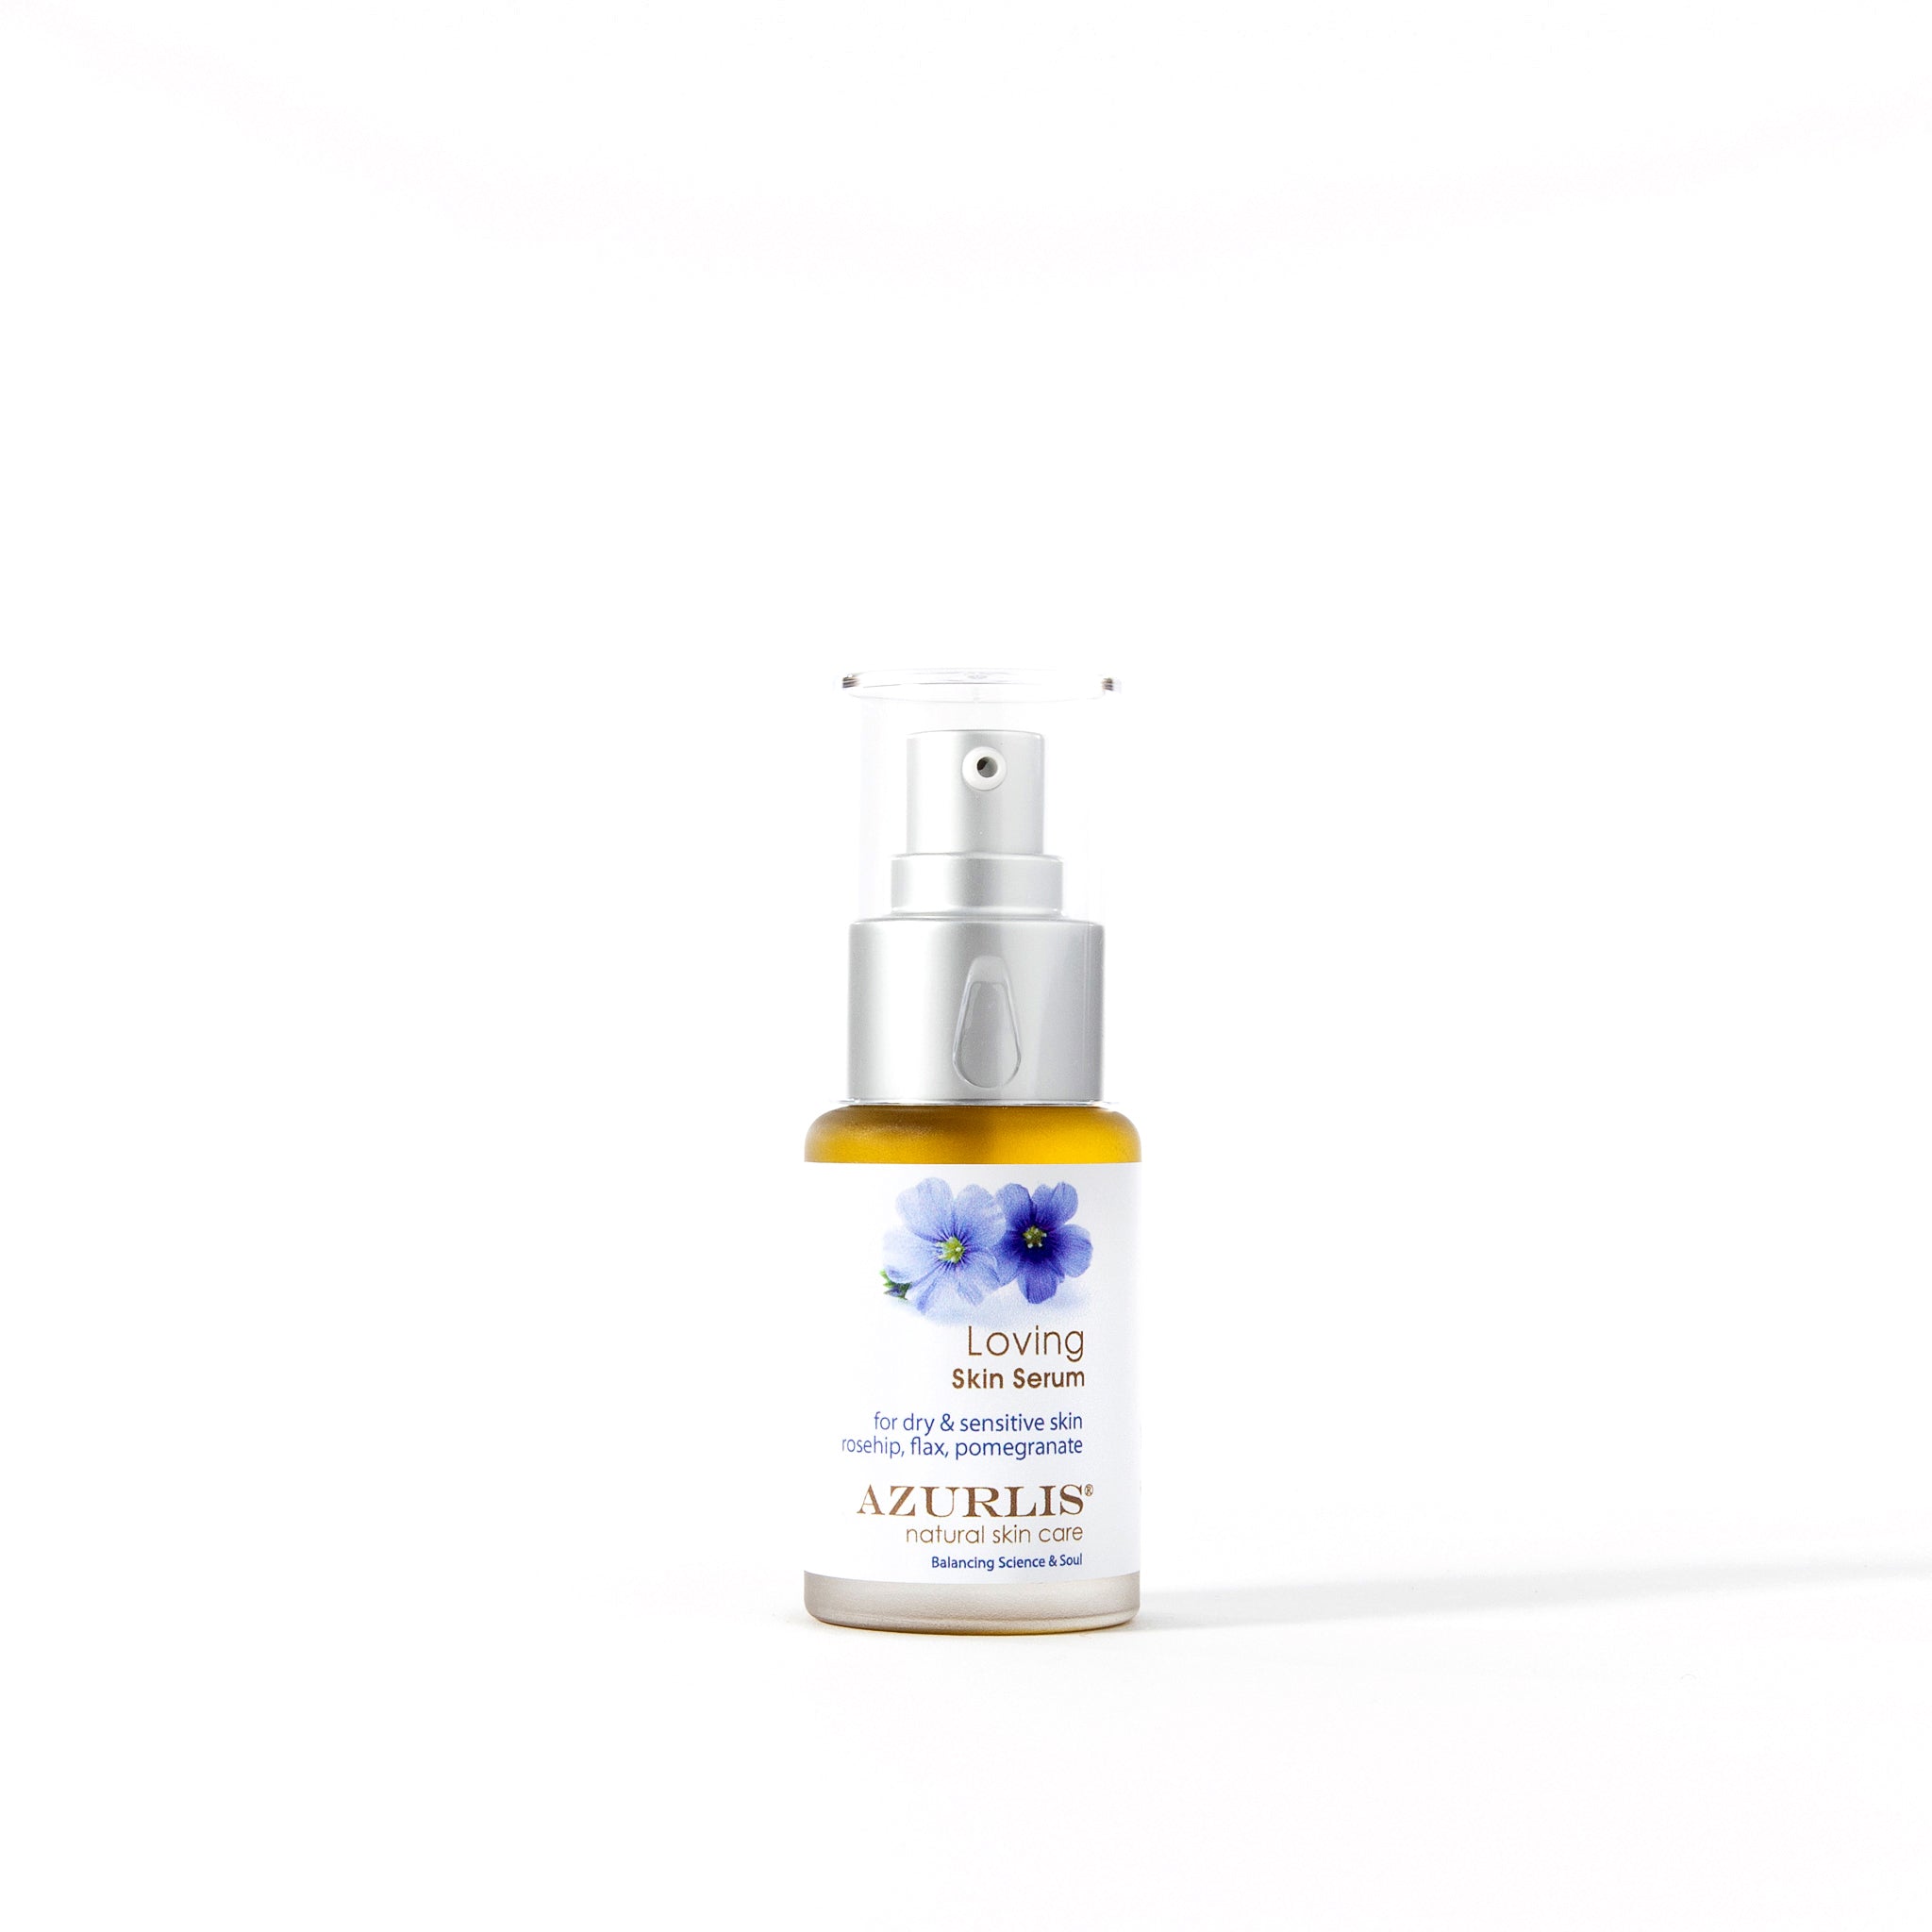 Azurlis™ Loving Skin Serum 30ml is for dry and sensitive skin.  This serum is composed of extremely gentle oils that are deeply penetrating to maintain hydration of the skin without an oily feeling. 